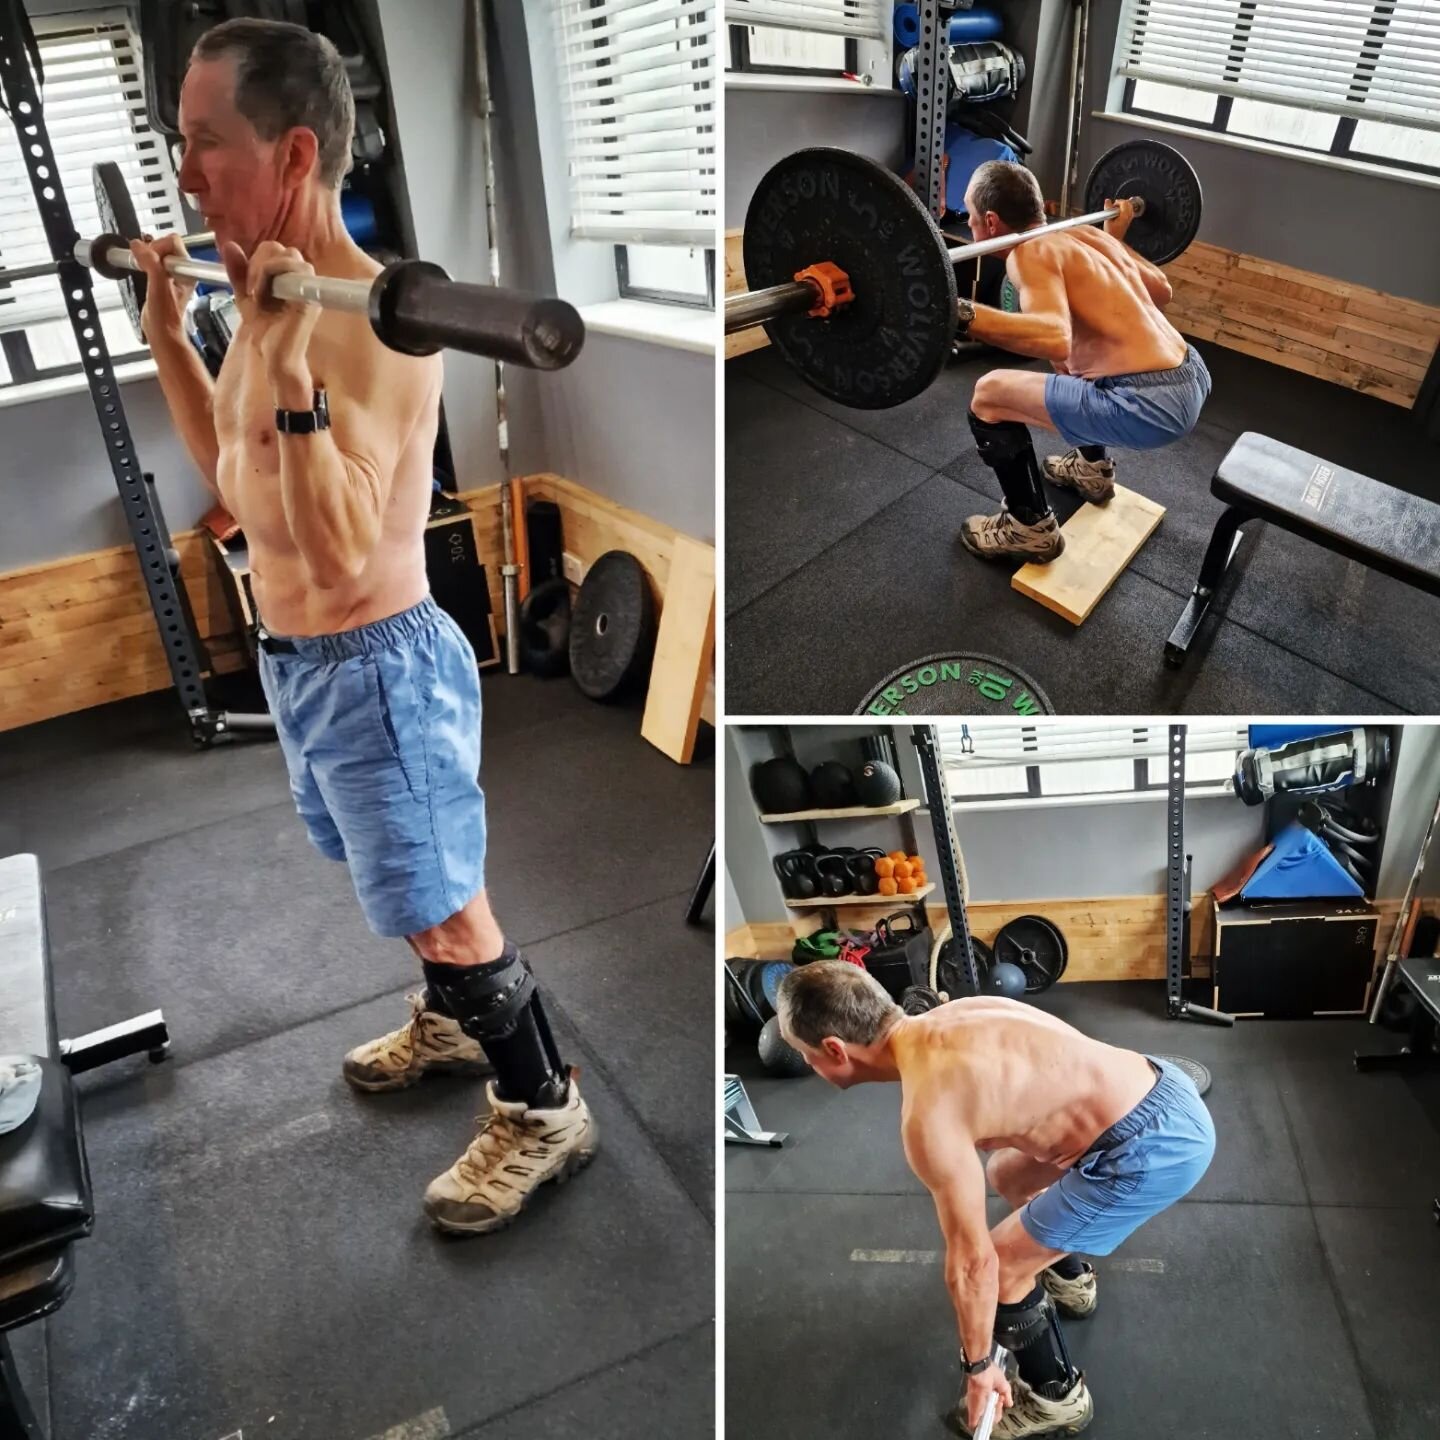 Now this is one inspirational dude!  @jameslinfordoutdoors is in his 70s, had a surgically fused ankle due to a climbing accident and is seen here deadlifting and squating (using a heel lift).
.
A regular mountain biker and general outdoor enthusiast